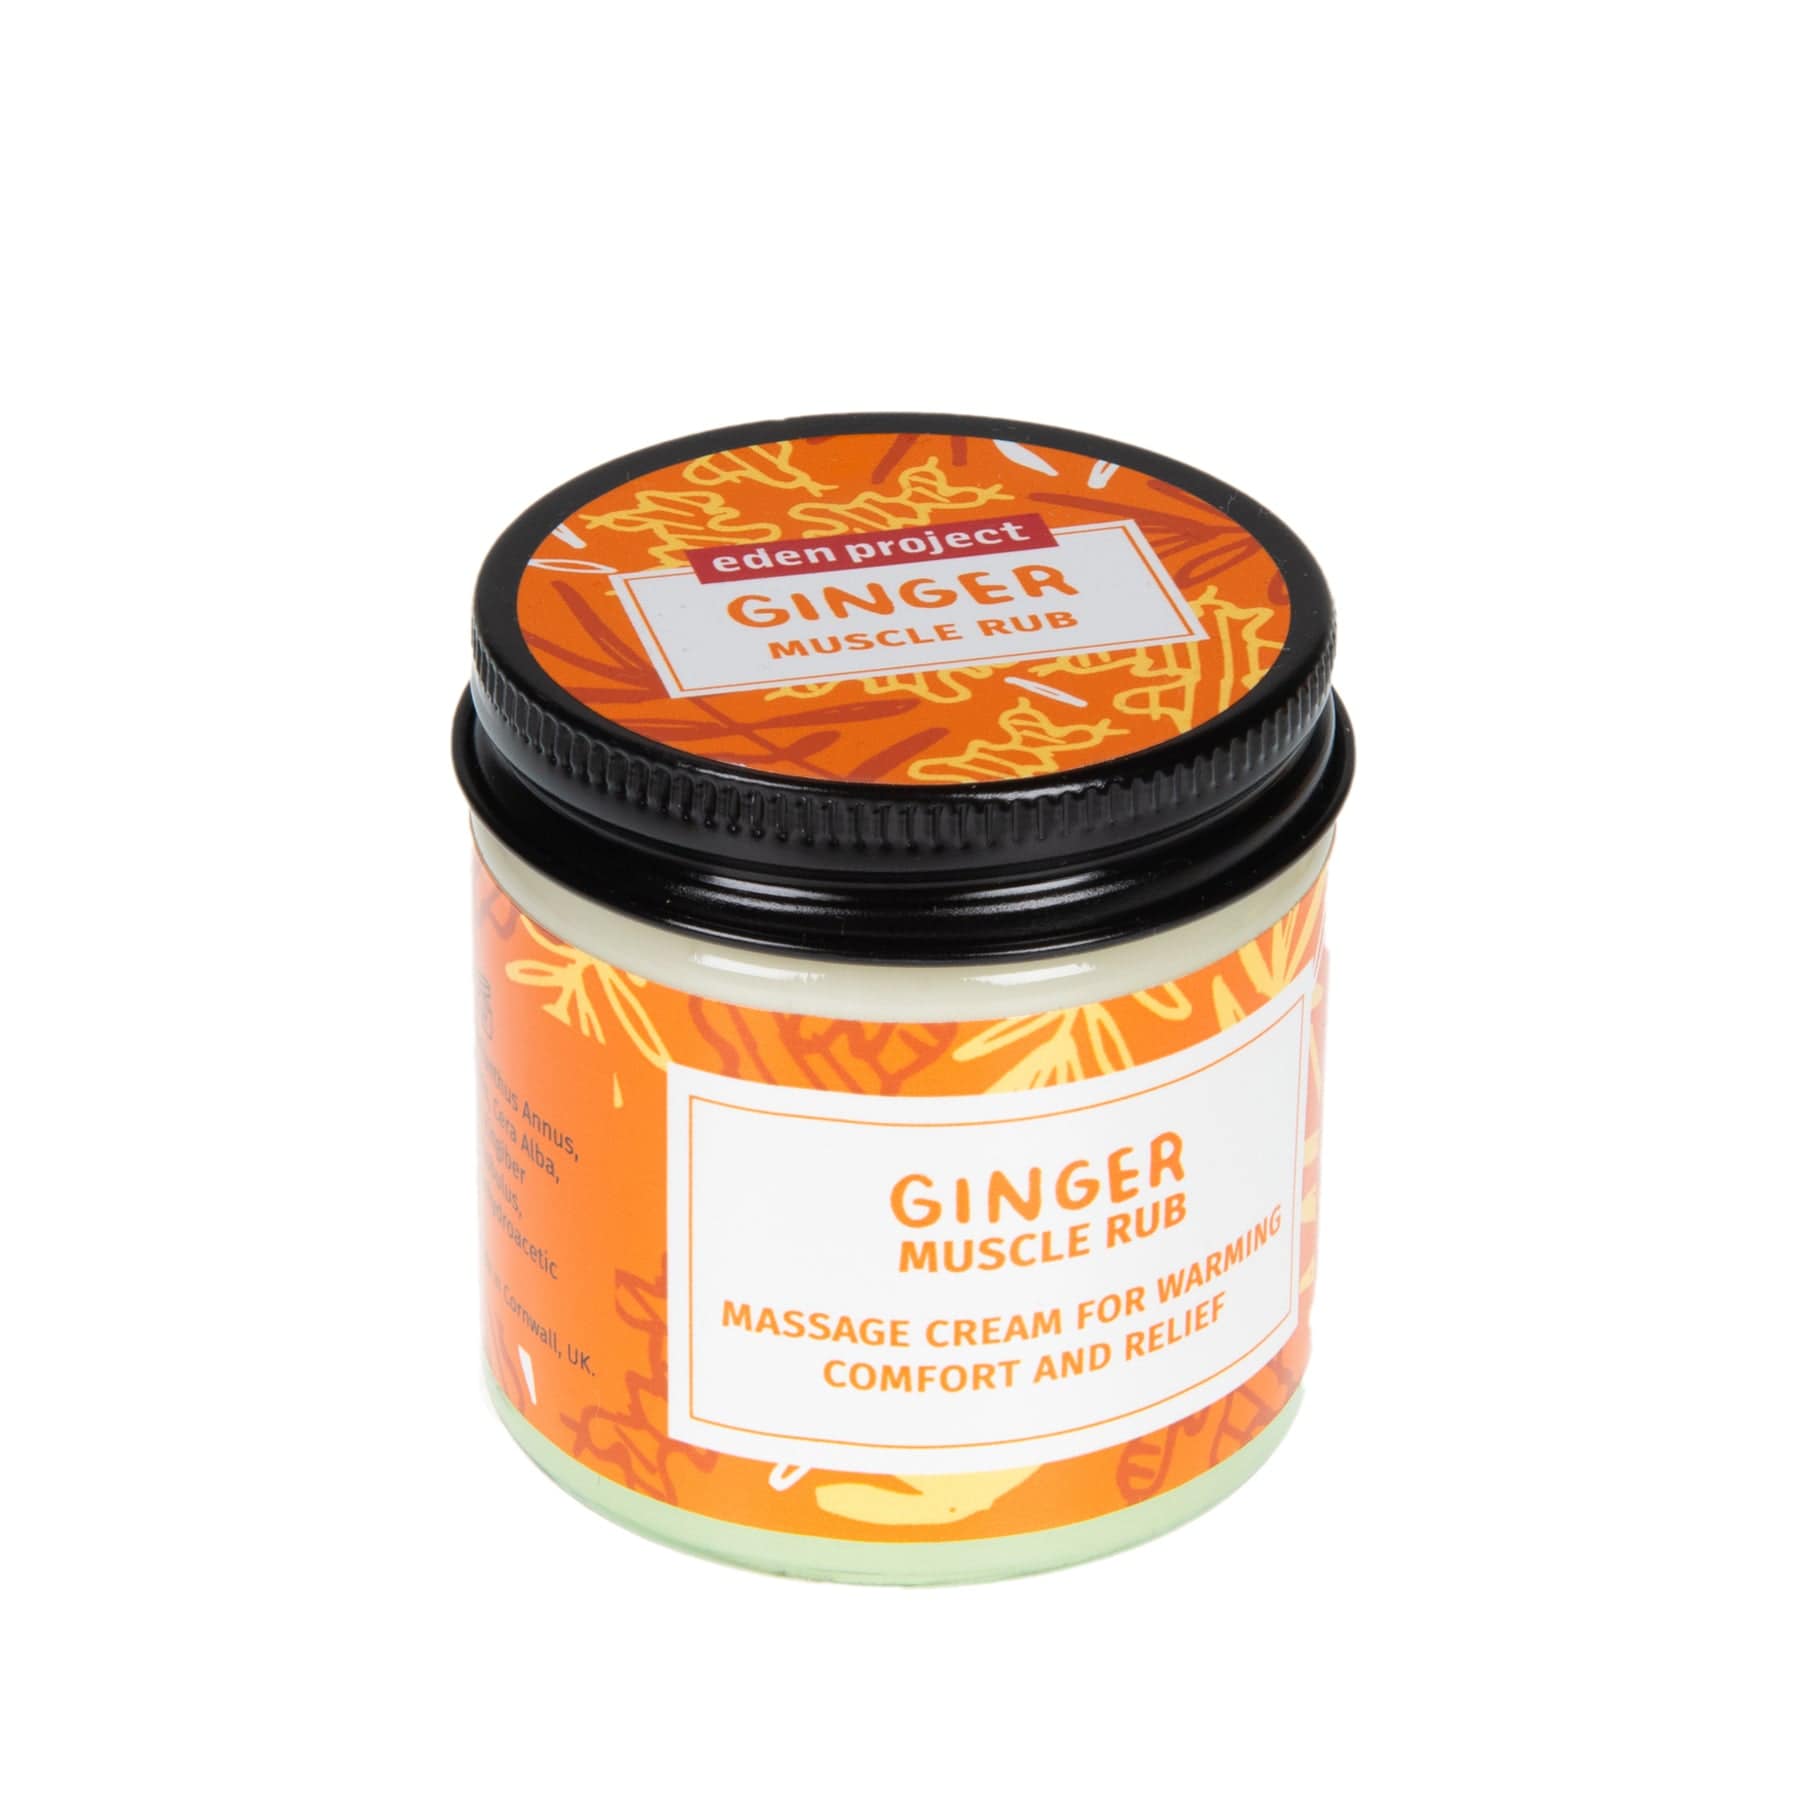 Ginger muscle rub